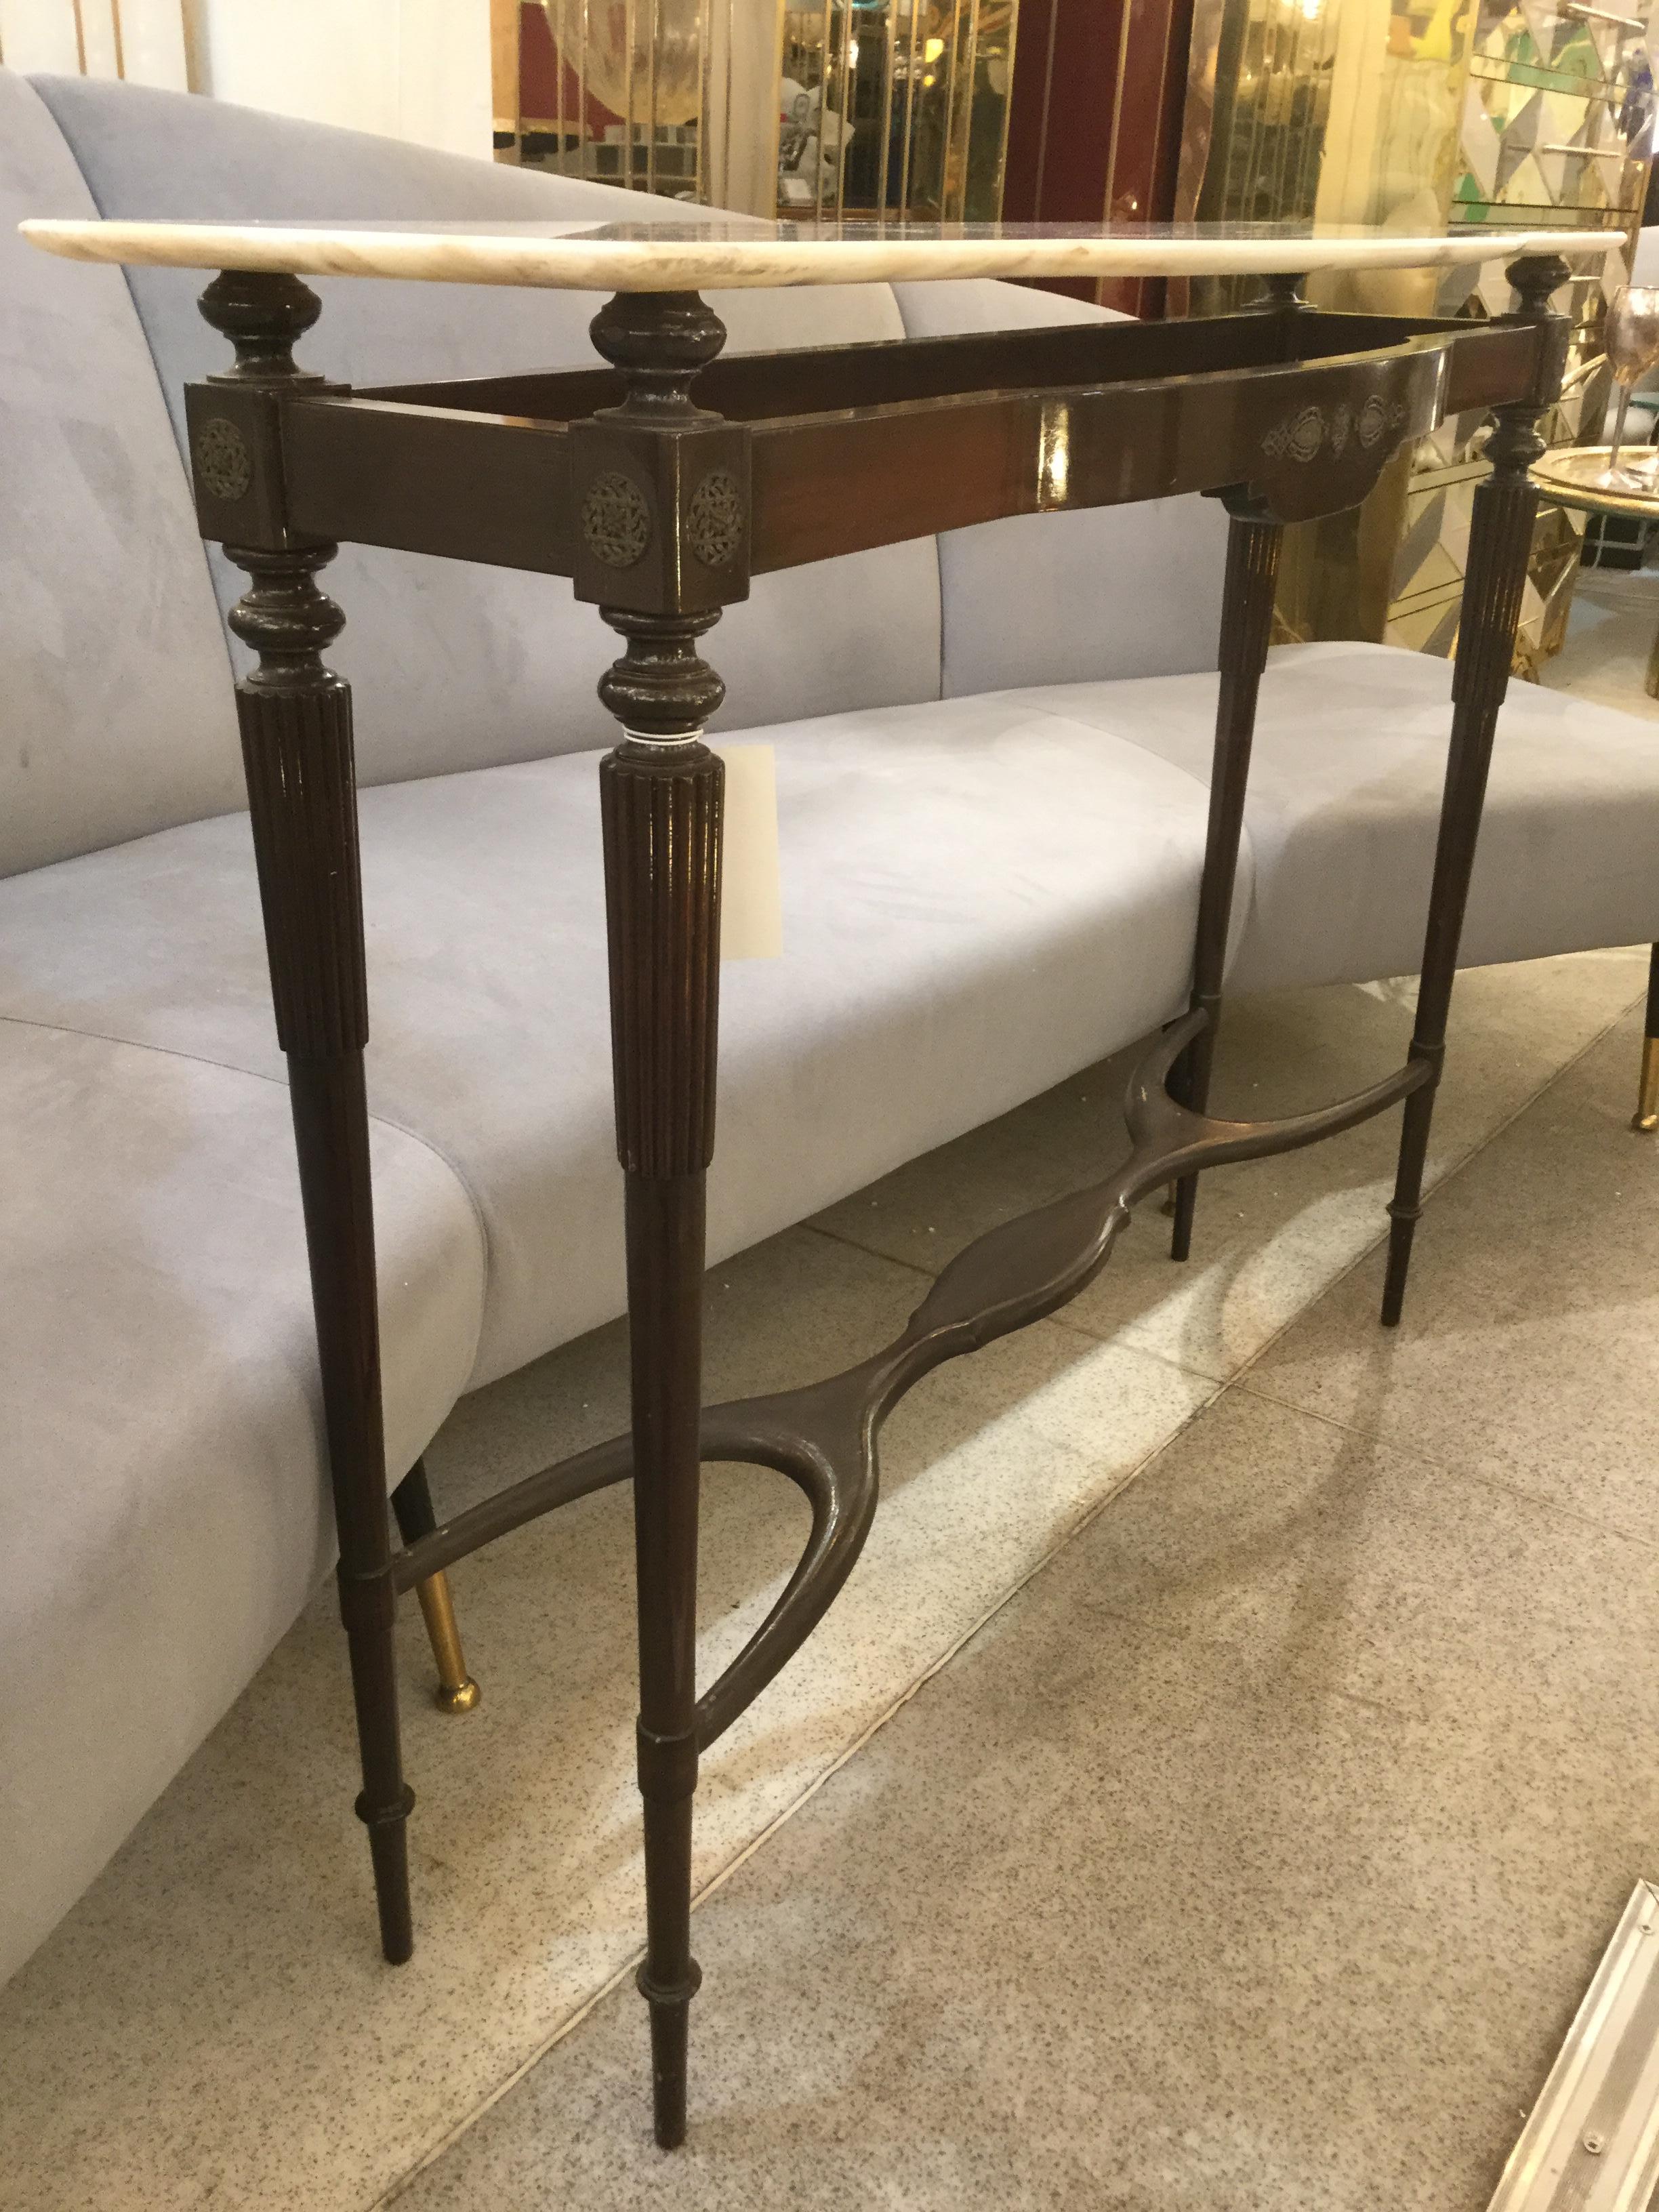 Hollywood Regency Italian Designed Console Table Attributed to Guglielmo Ulrich, 1940